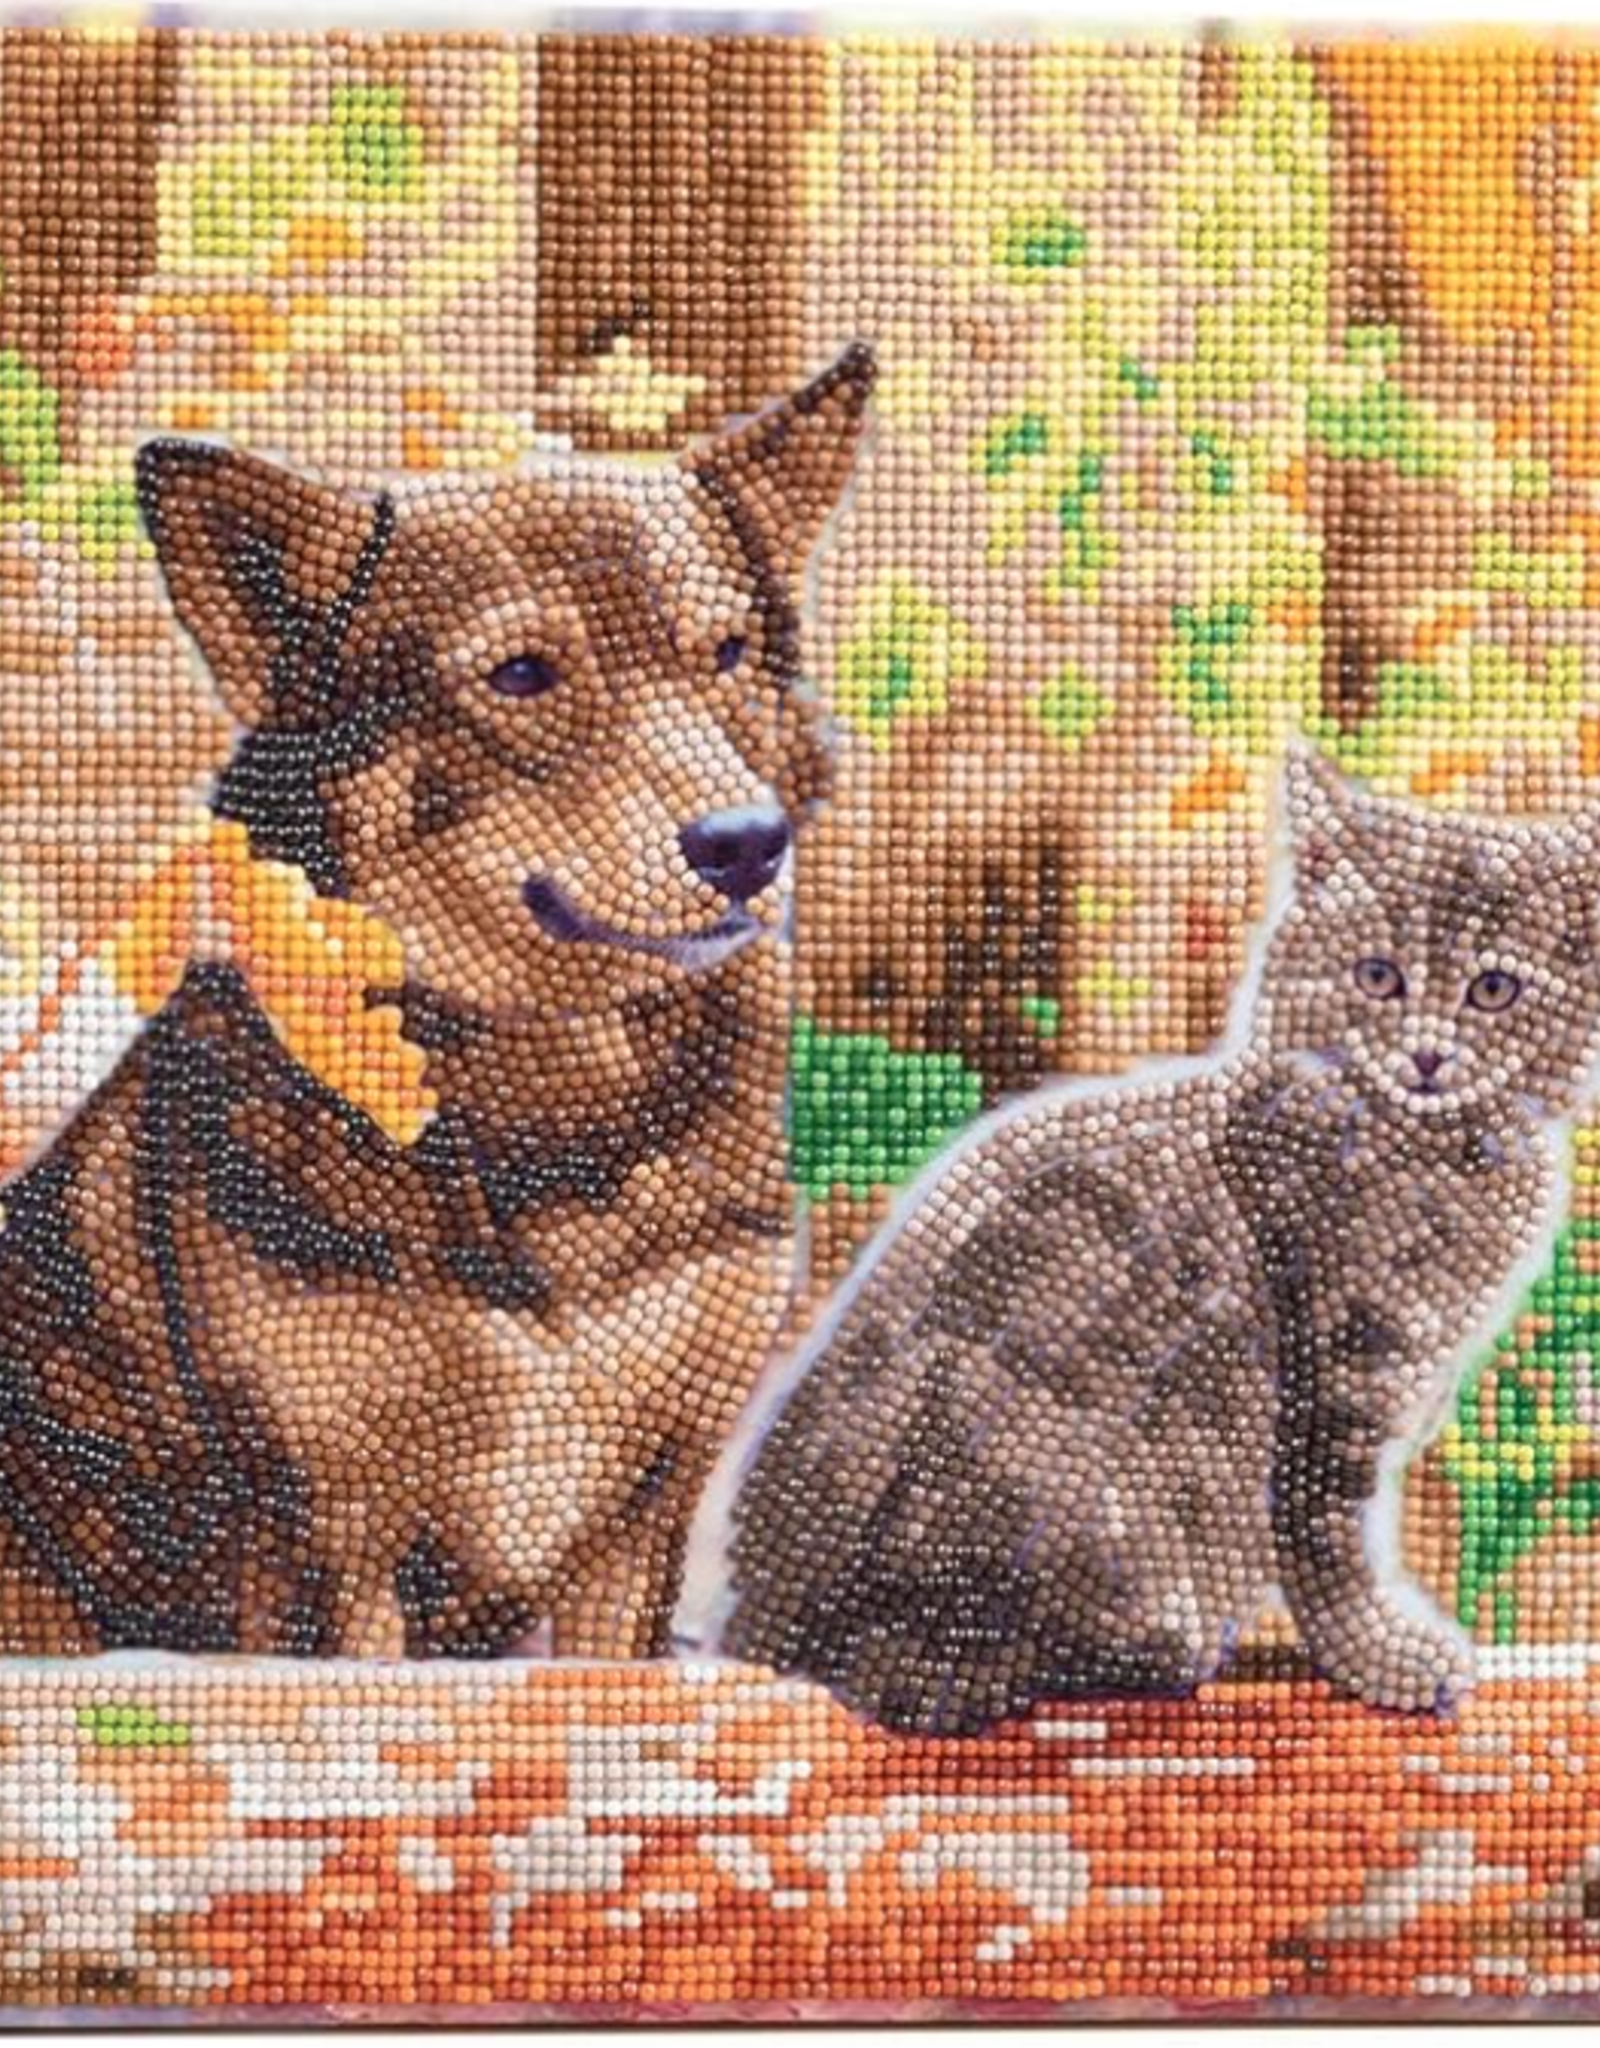 Outset media Crystal Art Md Cat & Dog in Woods